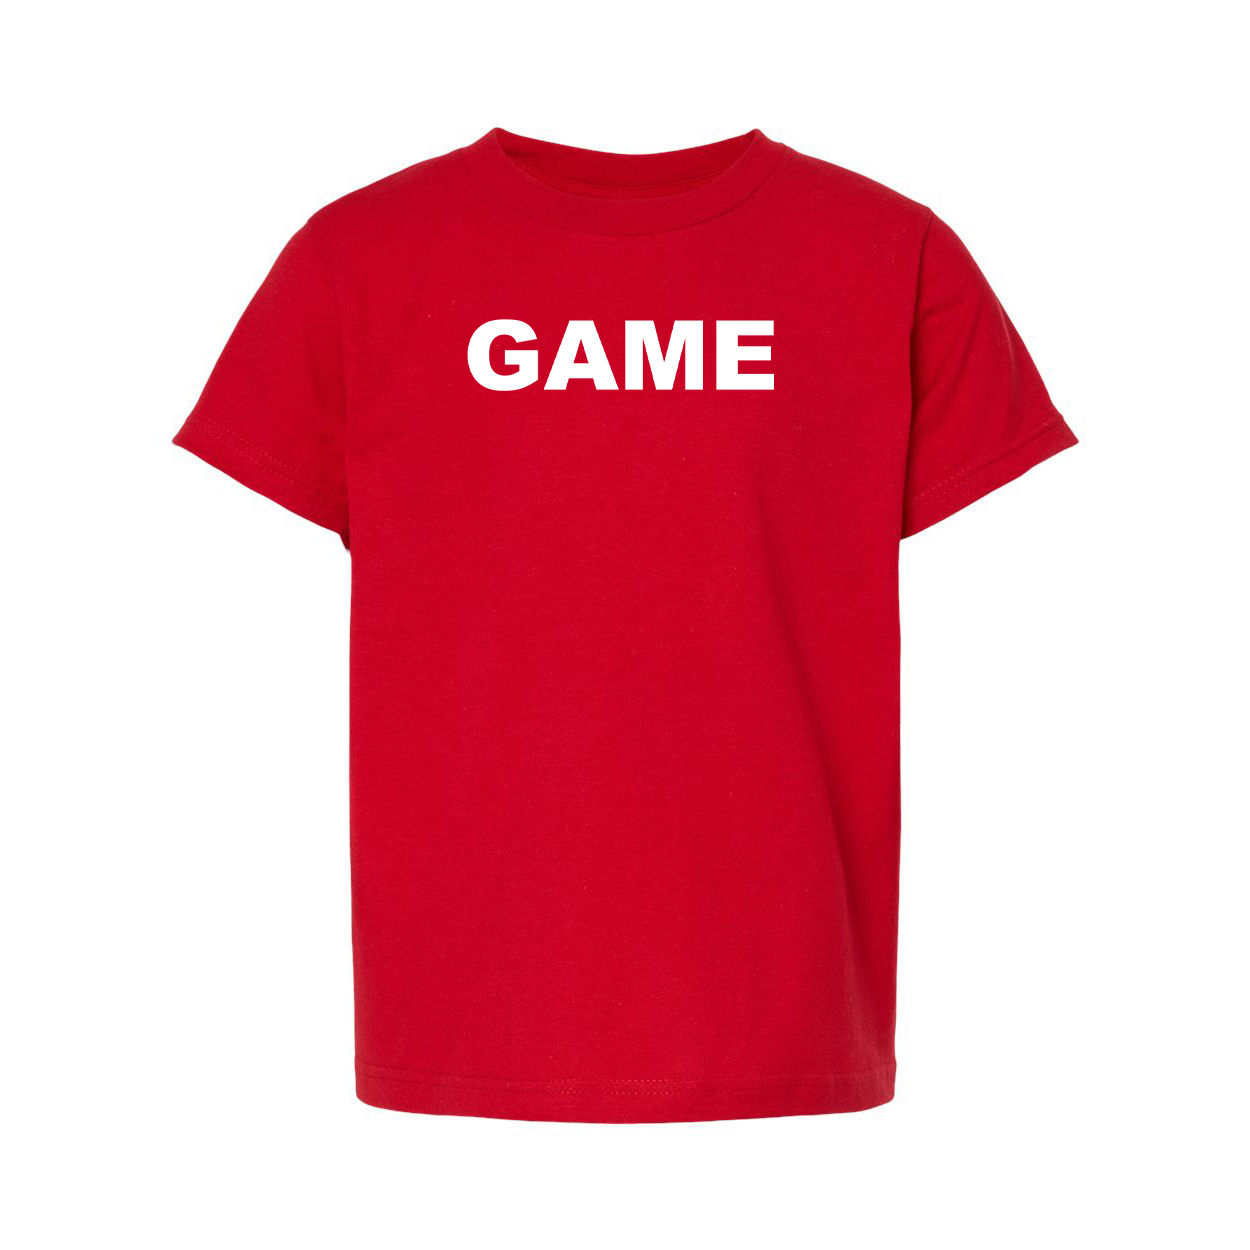 Game Brand Logo Classic Youth Unisex T-Shirt Red 